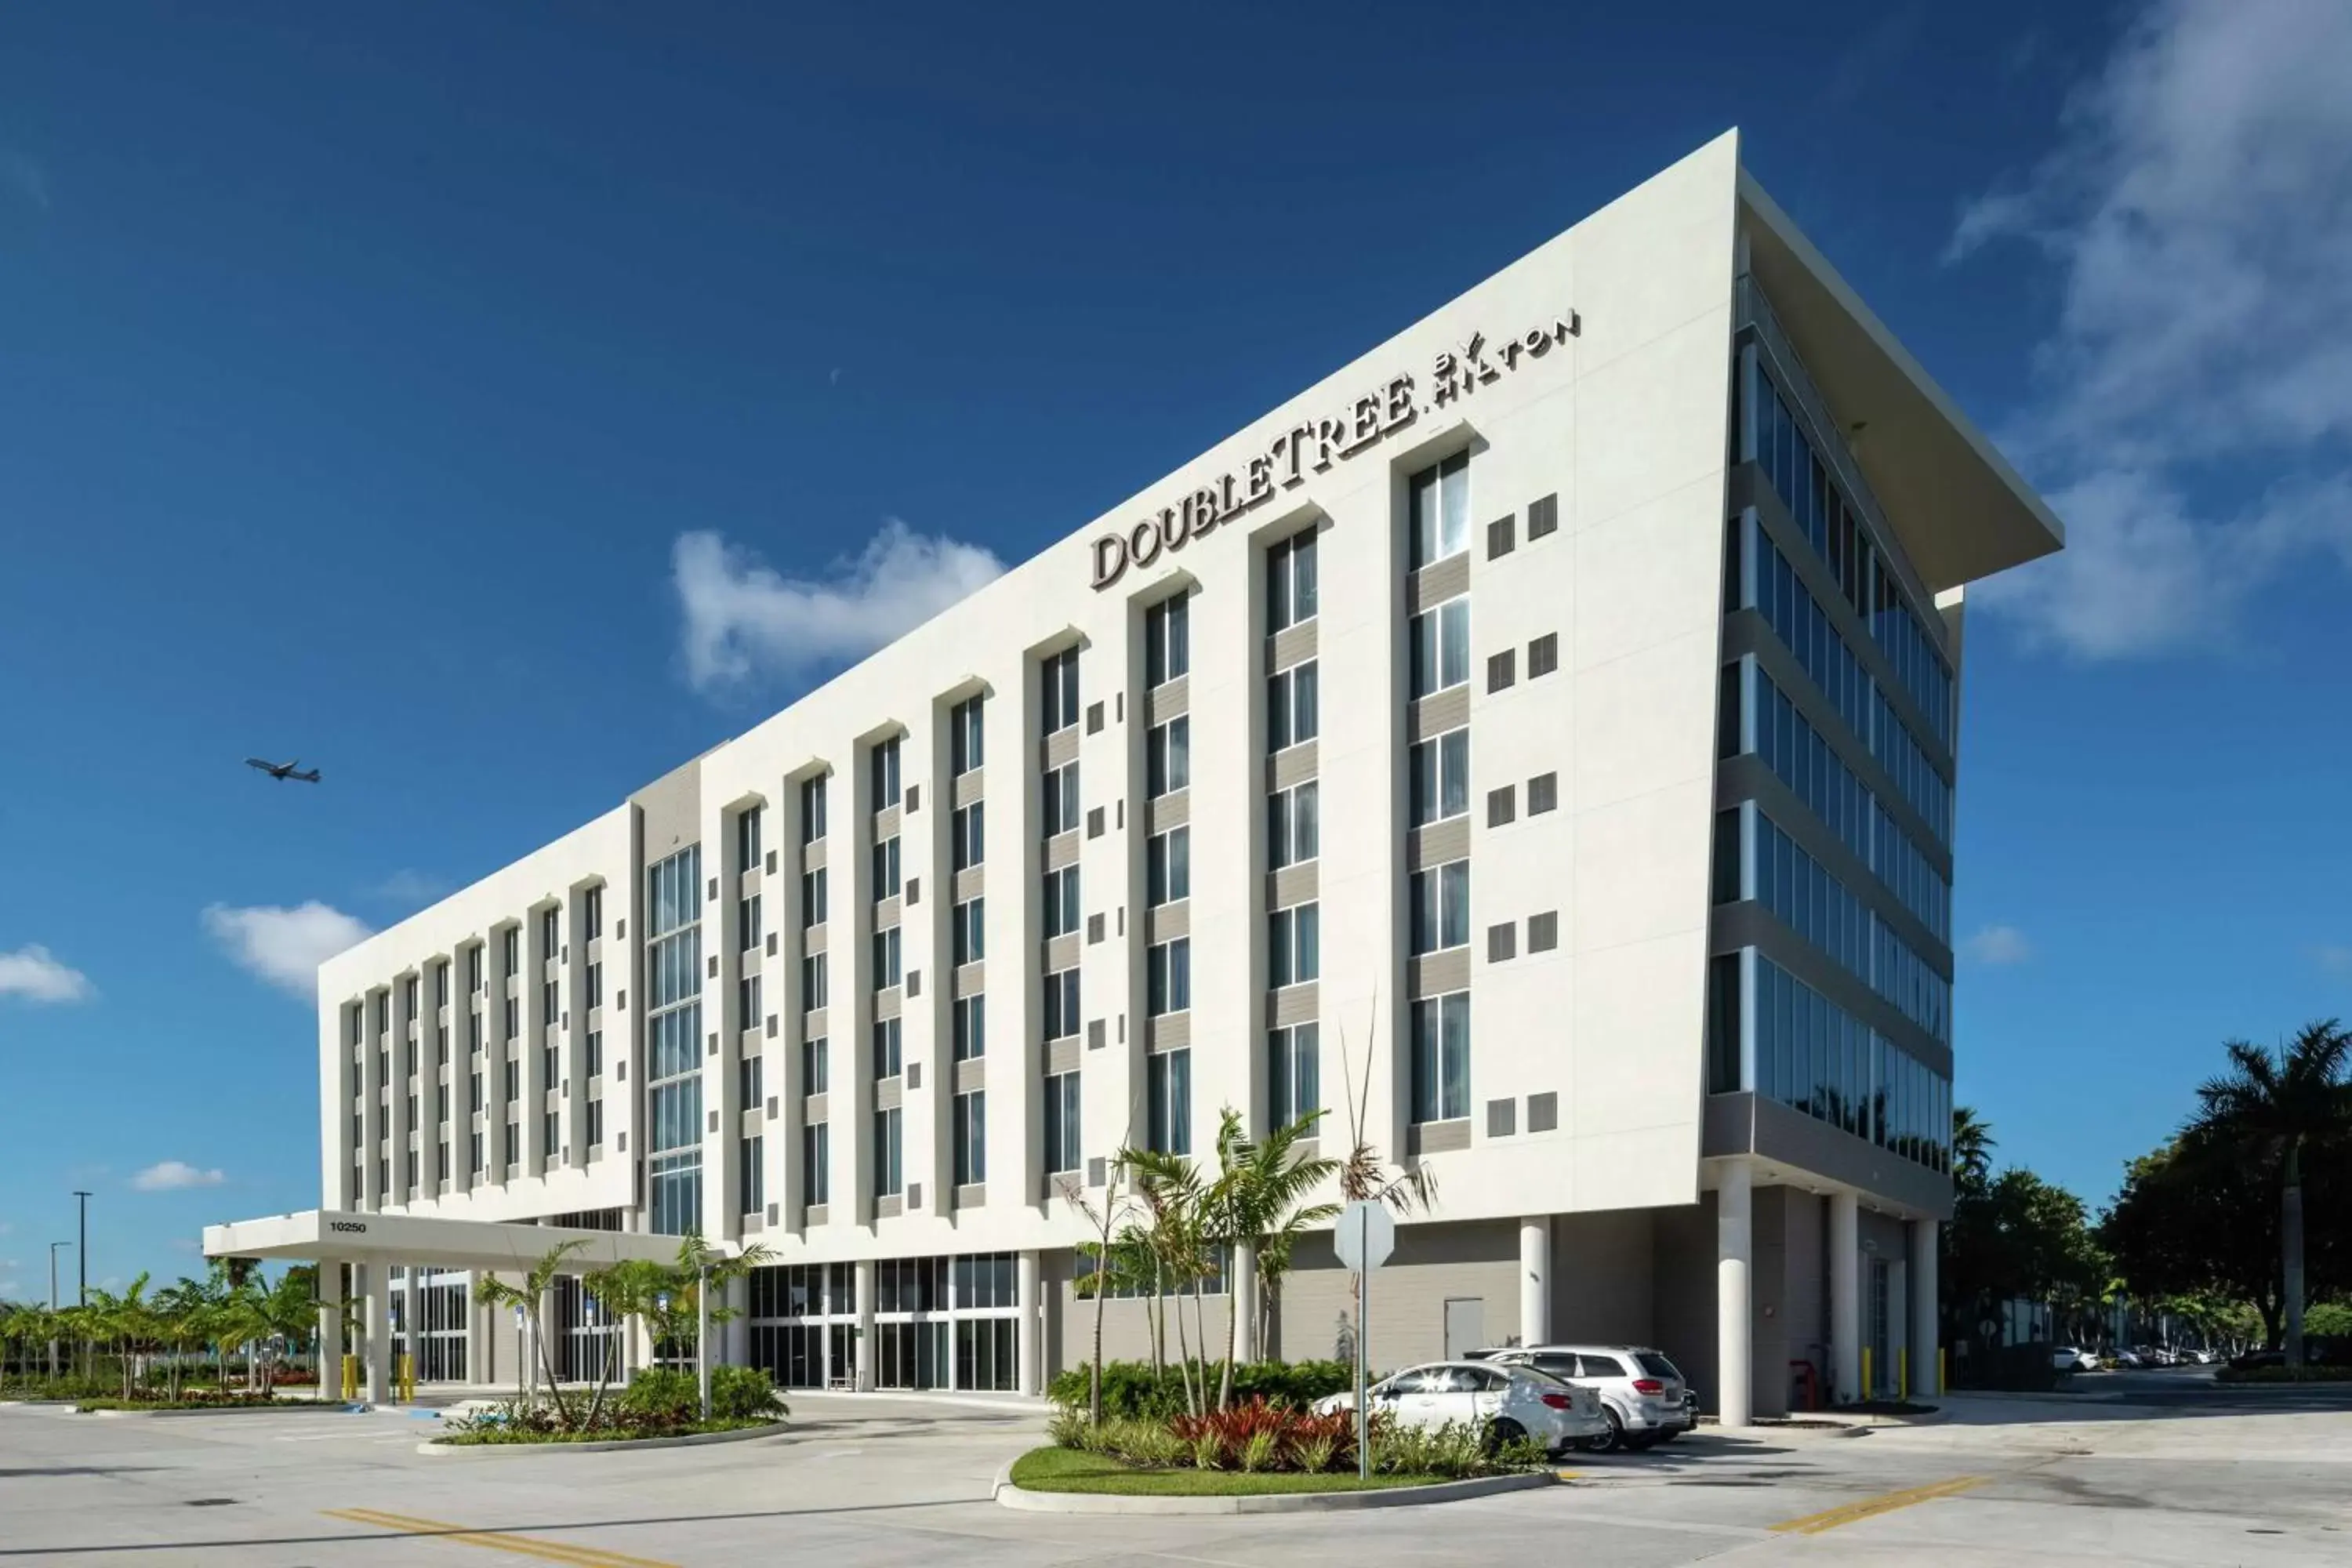 Property Building in DoubleTree by Hilton Miami Doral